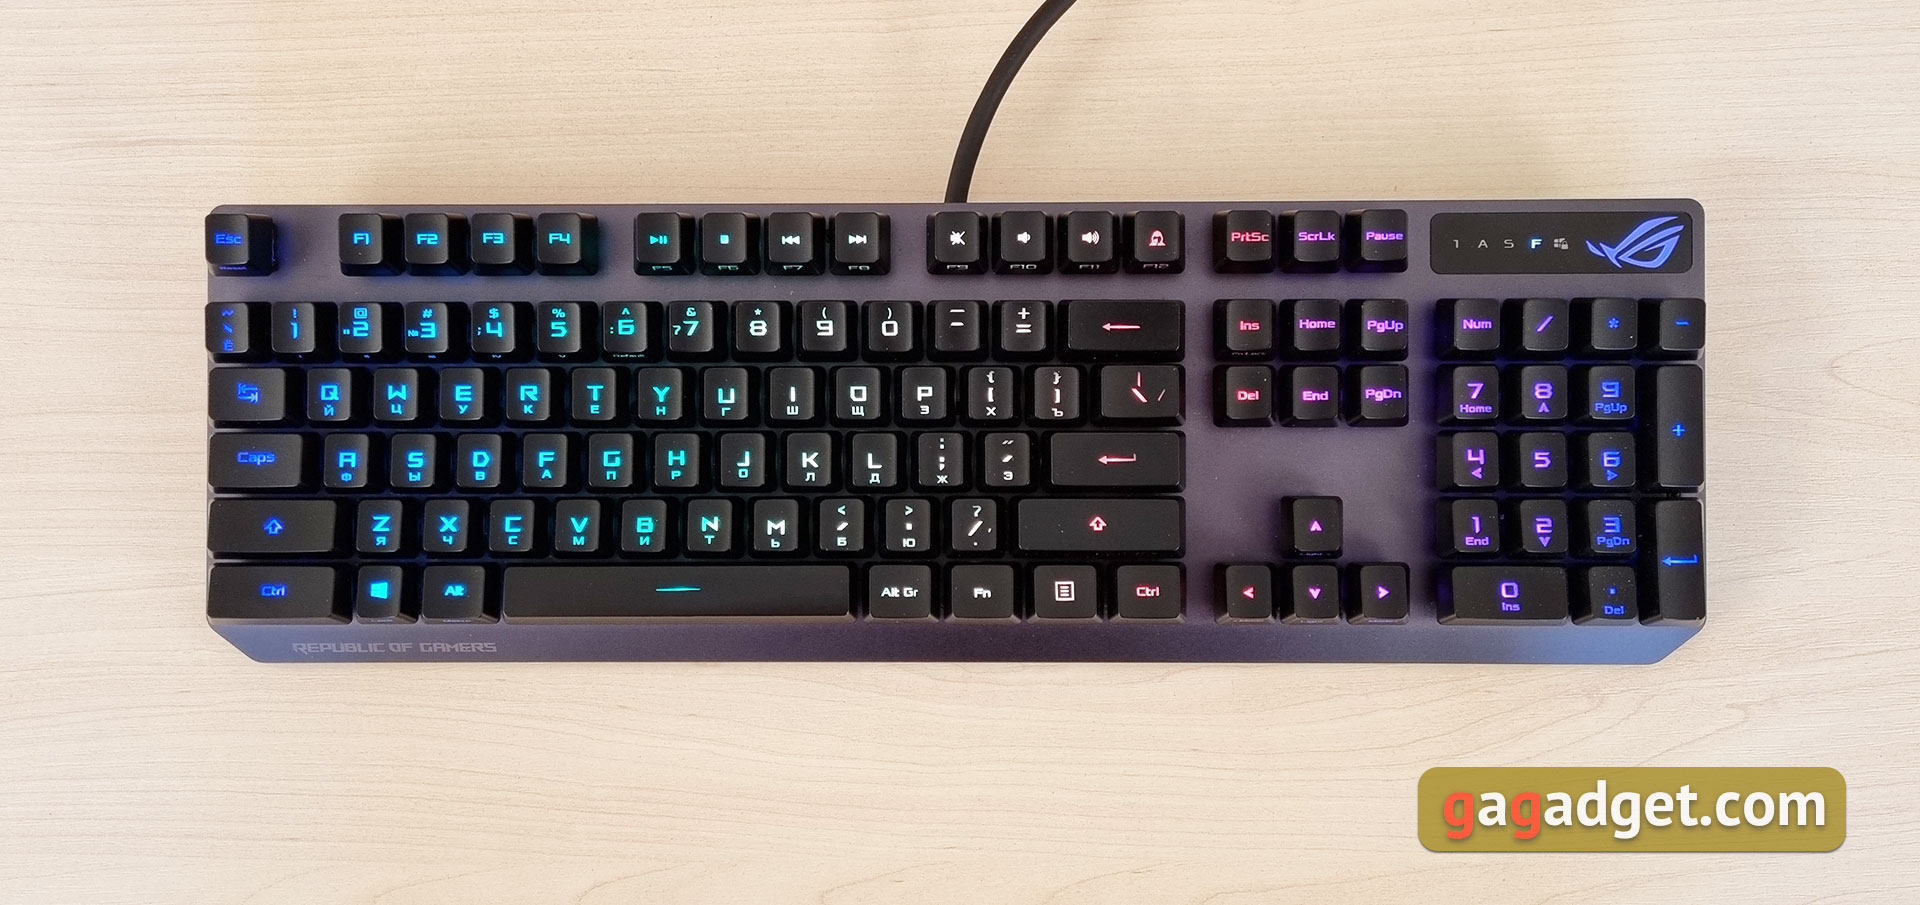 ASUS ROG Strix Scope RX Review: an Opto-Mechanical Gaming Keyboard with Water Protection-5